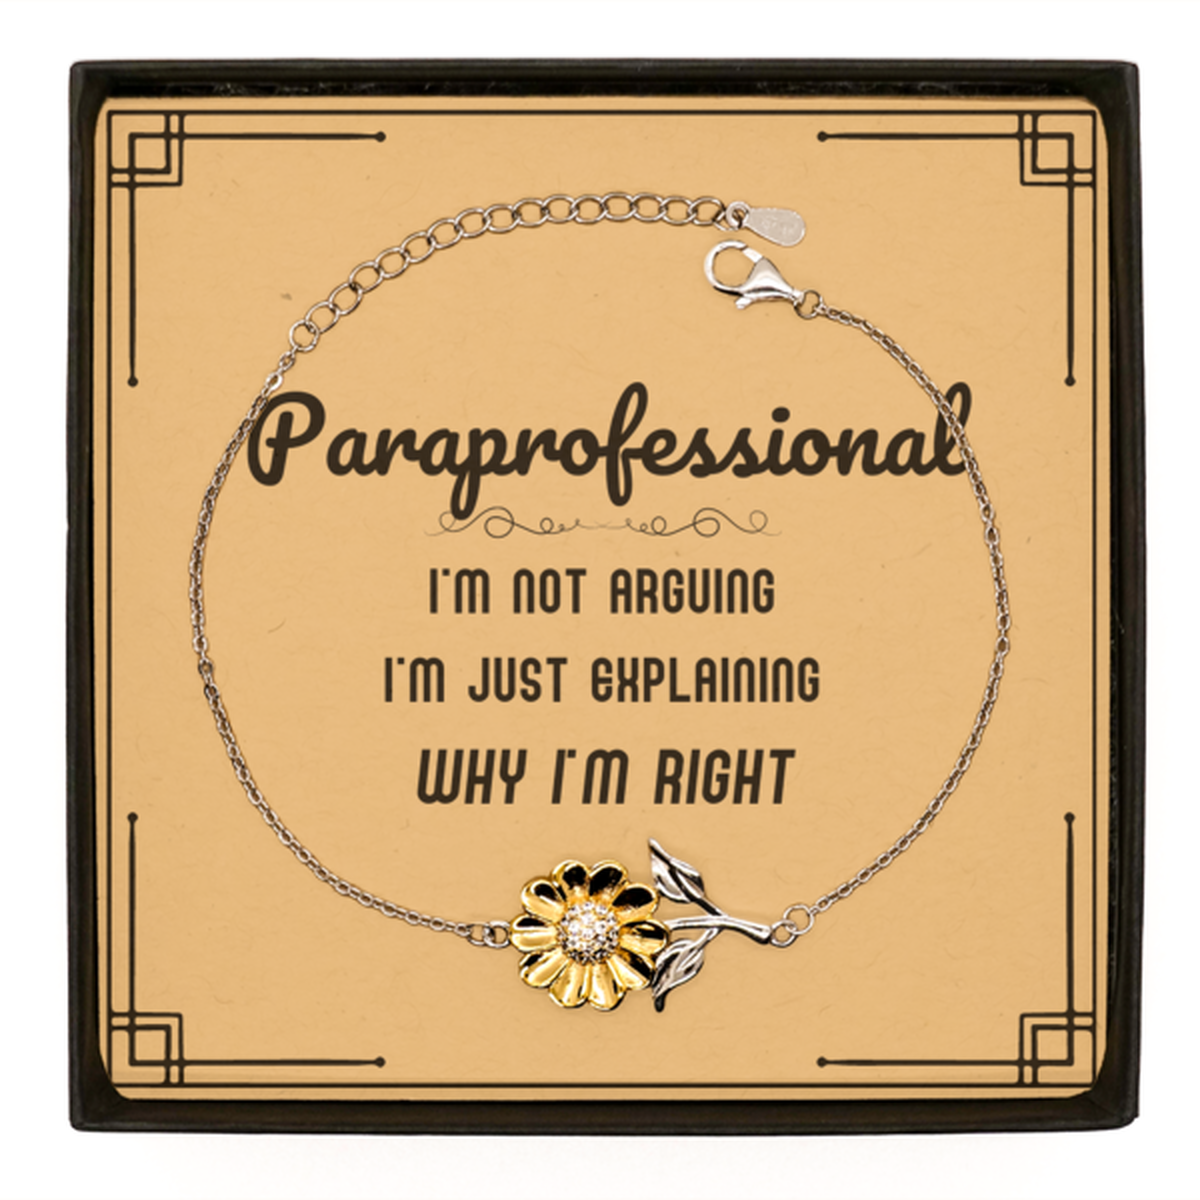 Paraprofessional I'm not Arguing. I'm Just Explaining Why I'm RIGHT Sunflower Bracelet, Funny Saying Quote Paraprofessional Gifts For Paraprofessional Message Card Graduation Birthday Christmas Gifts for Men Women Coworker